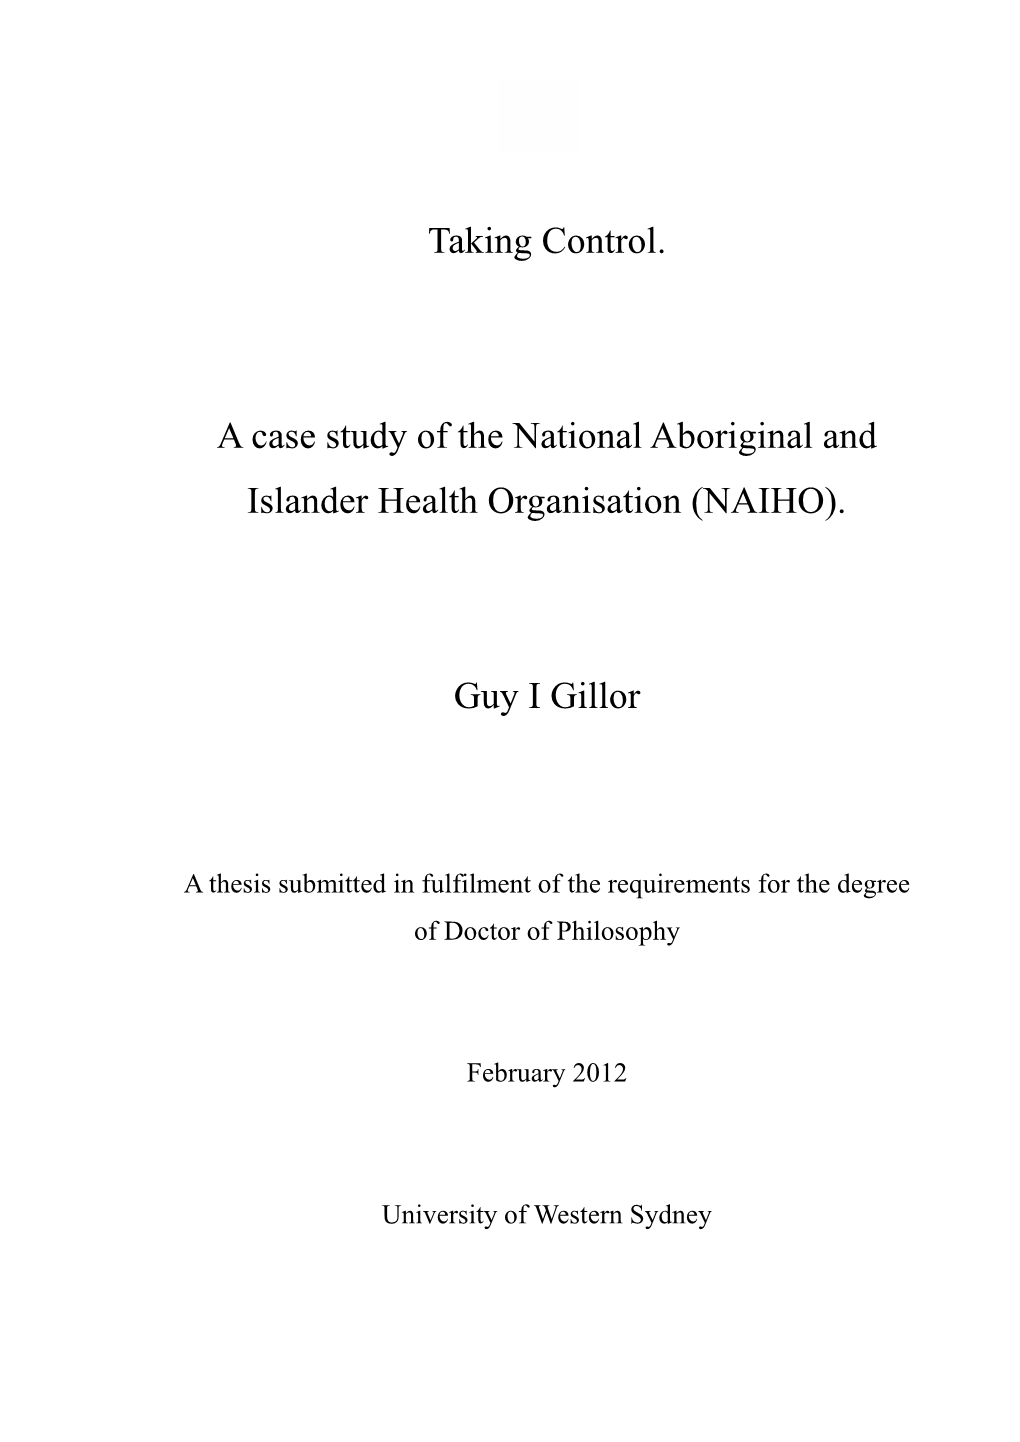 Taking Control. a Case Study of the National Aboriginal and Islander